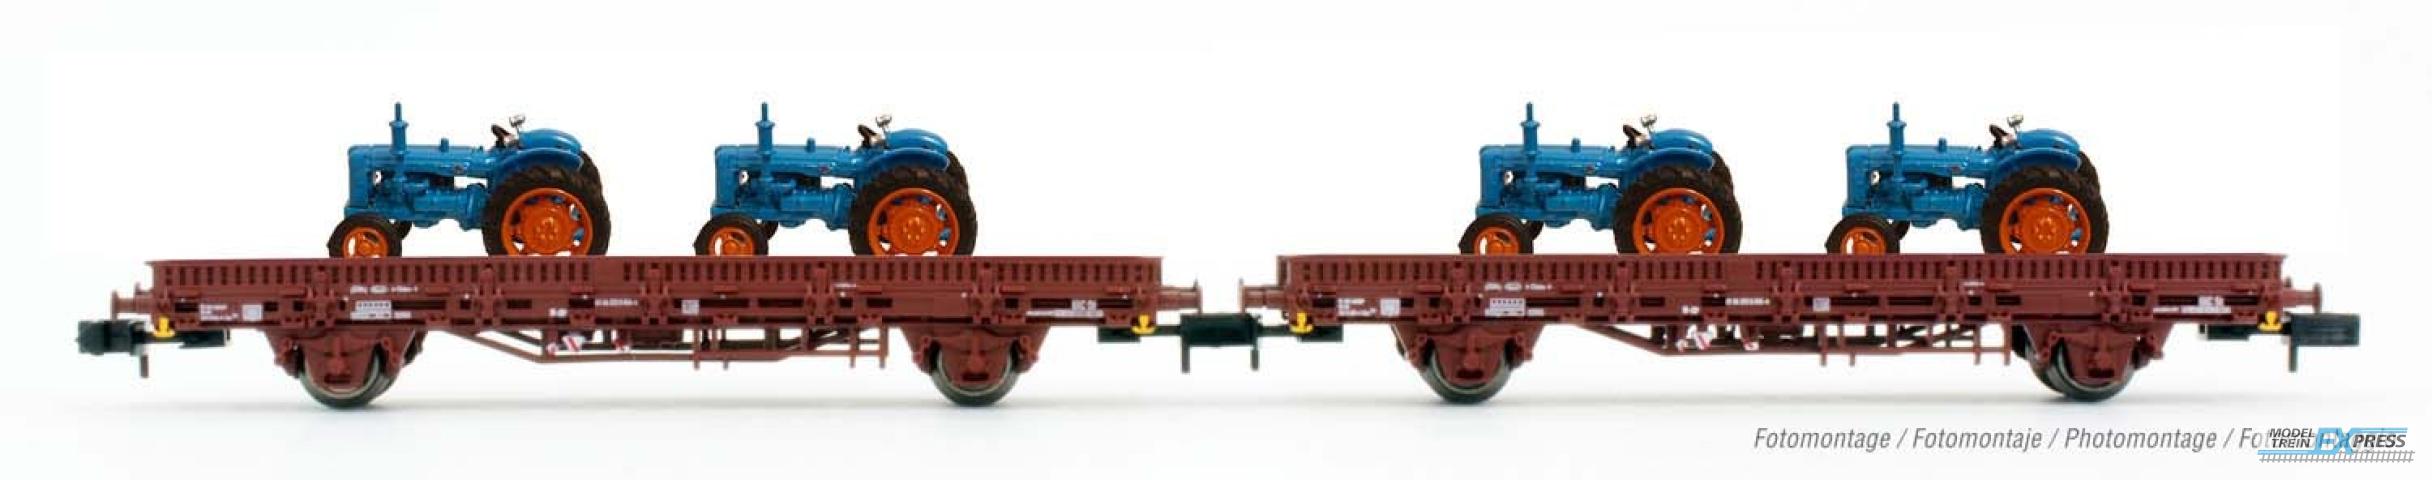 Arnold 6488 RENFE, 2-unit pack 2-axle flat wagons type Ks, loaded with tractors "Ebro", period III-IV